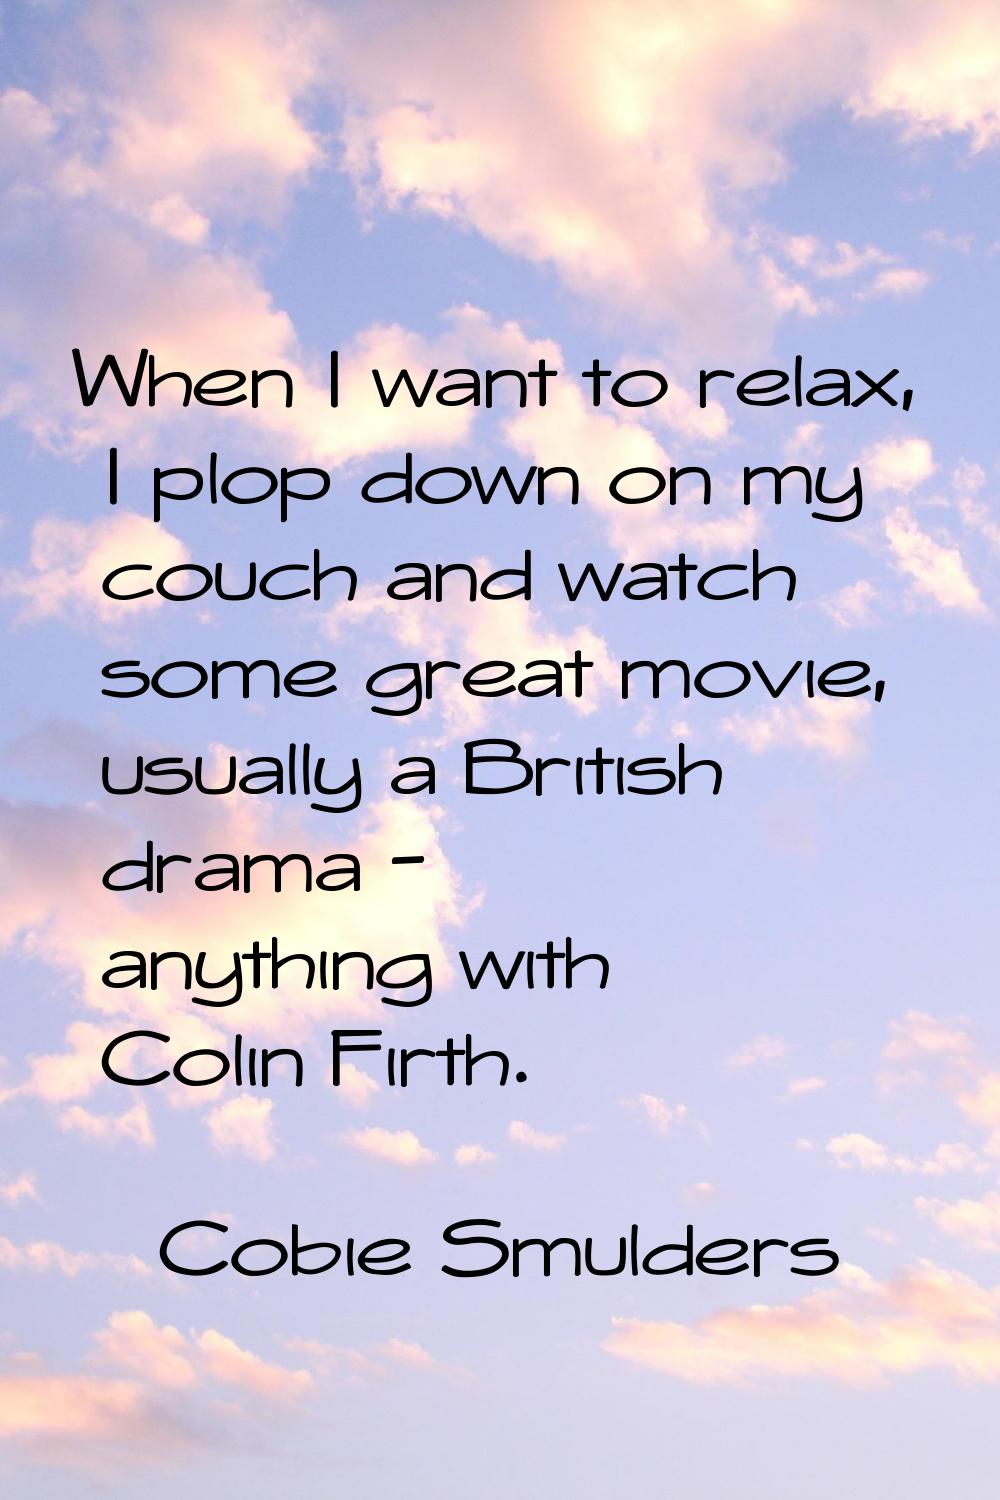 When I want to relax, I plop down on my couch and watch some great movie, usually a British drama -